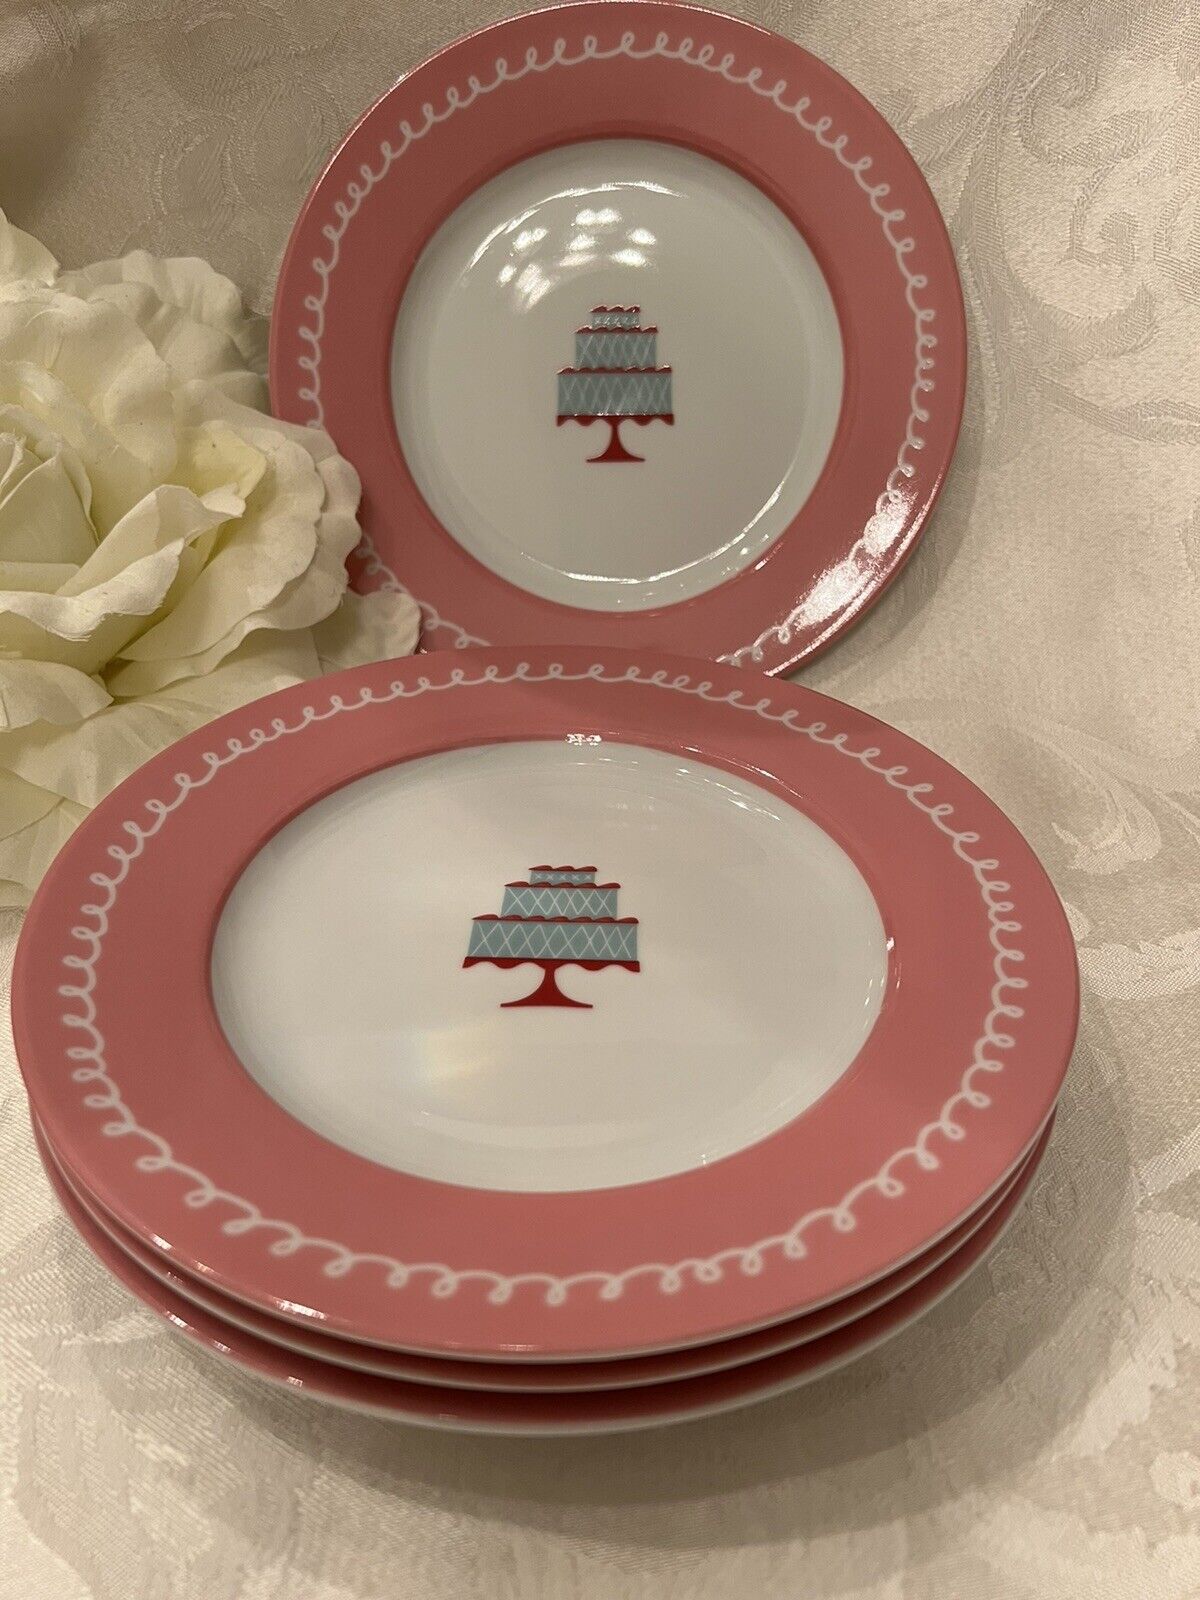 Cake Boss Devoted Easy-to-use To Quantity limited Dessert Set Valas Of 4 Buddy Plates